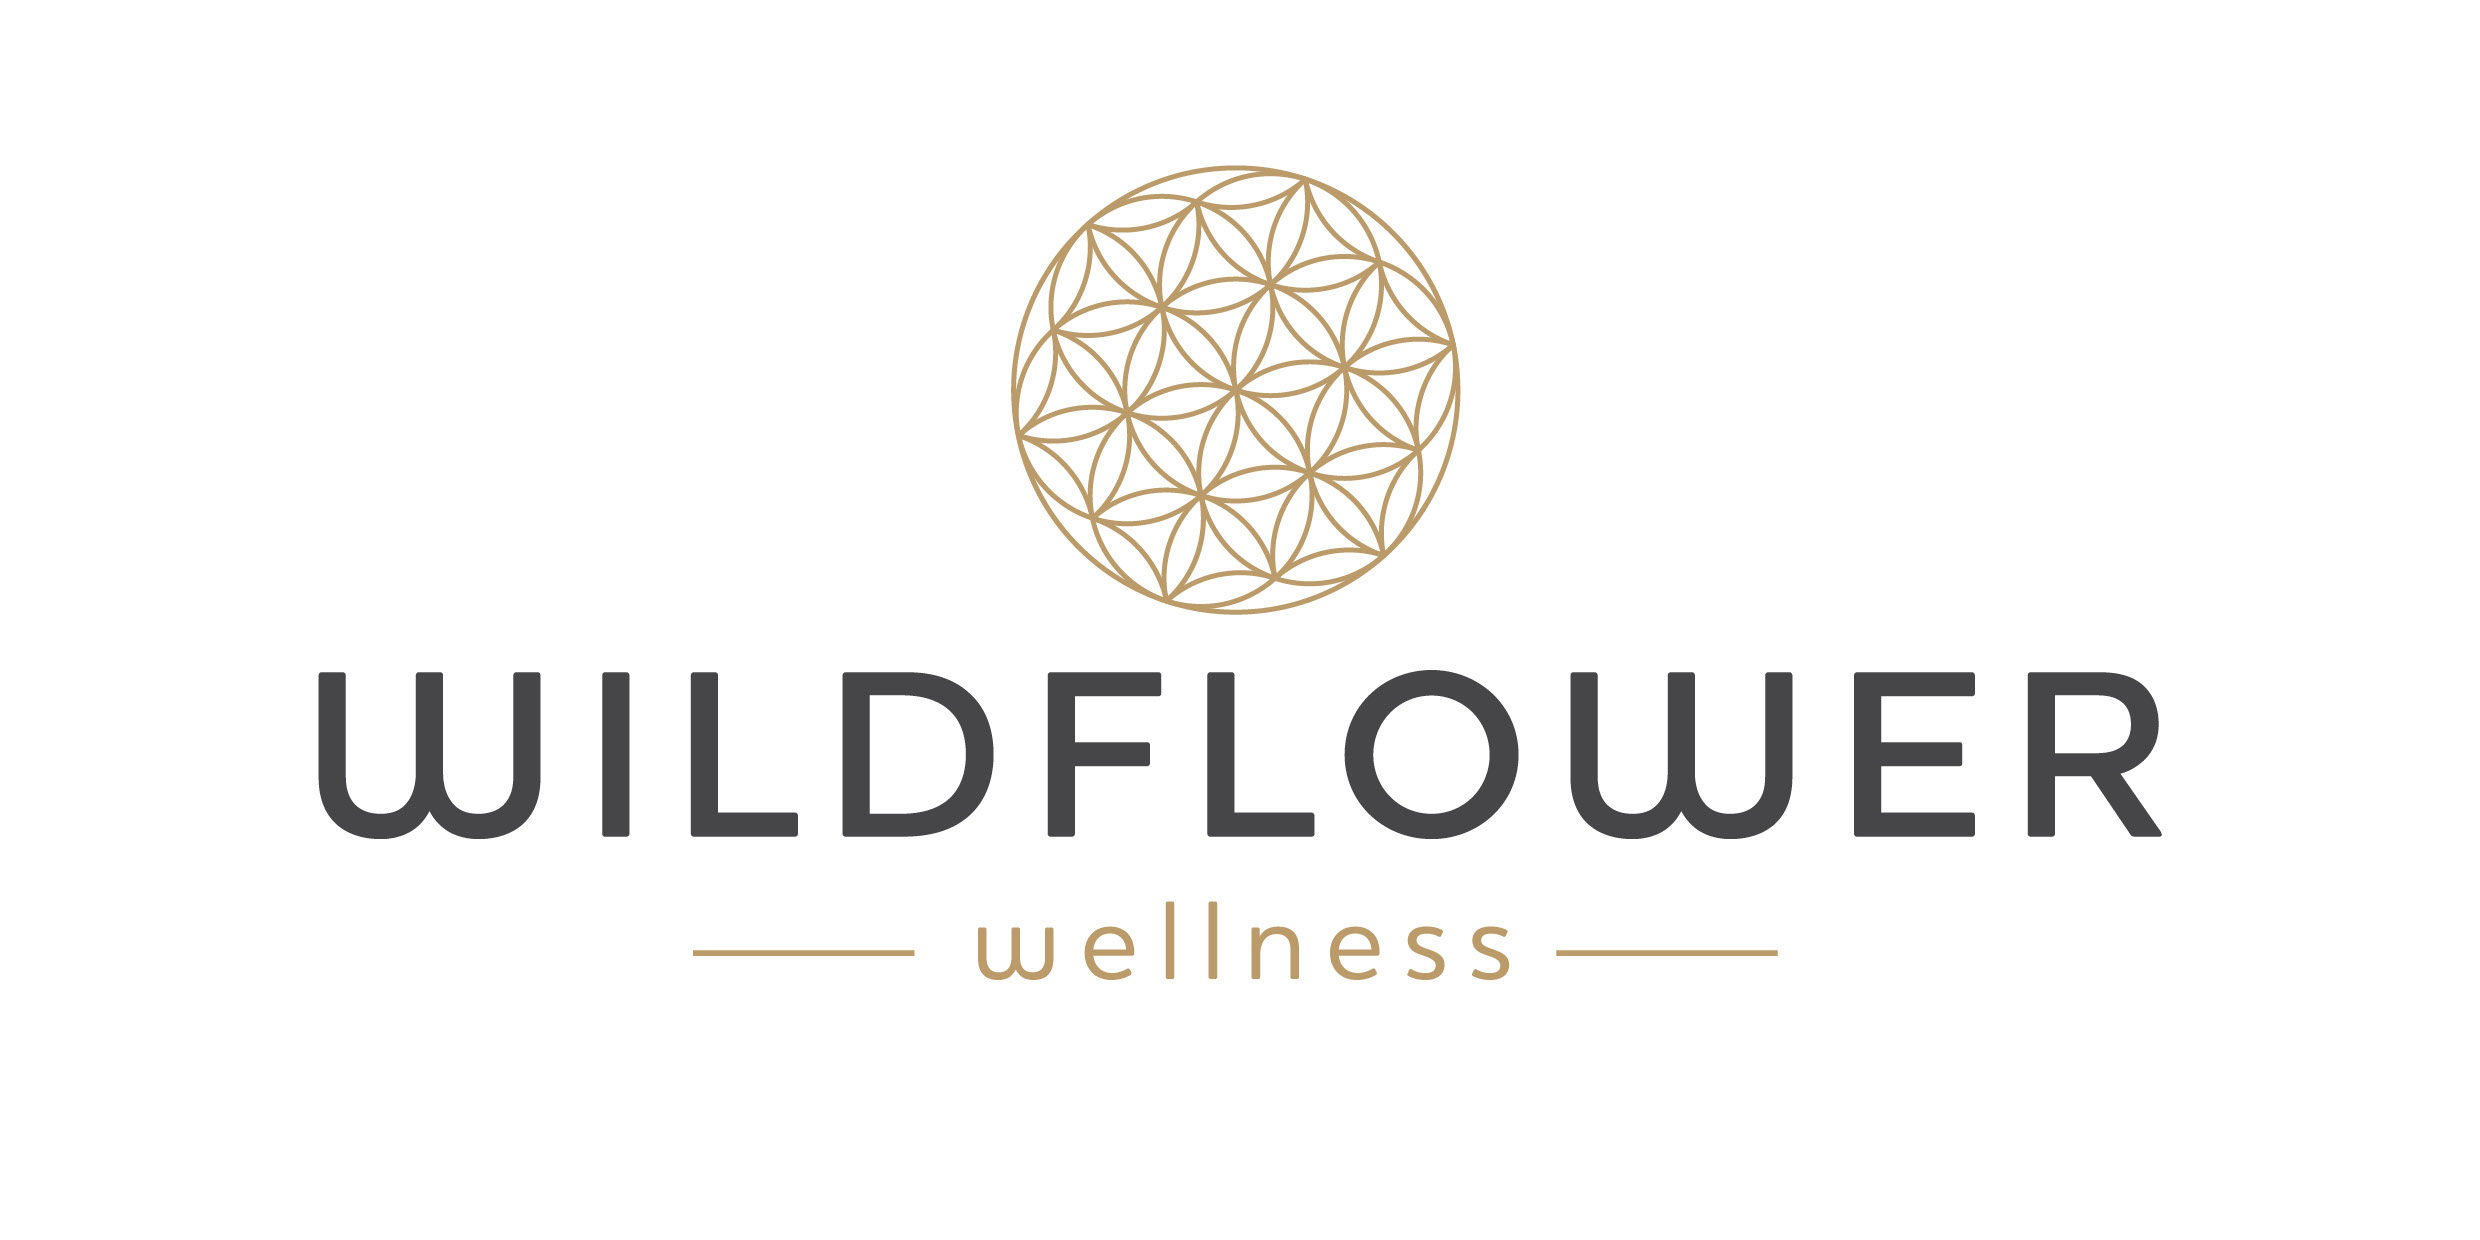 Wildflower Wellness - An urban sanctuary providing massage, natural health treatments and therapies